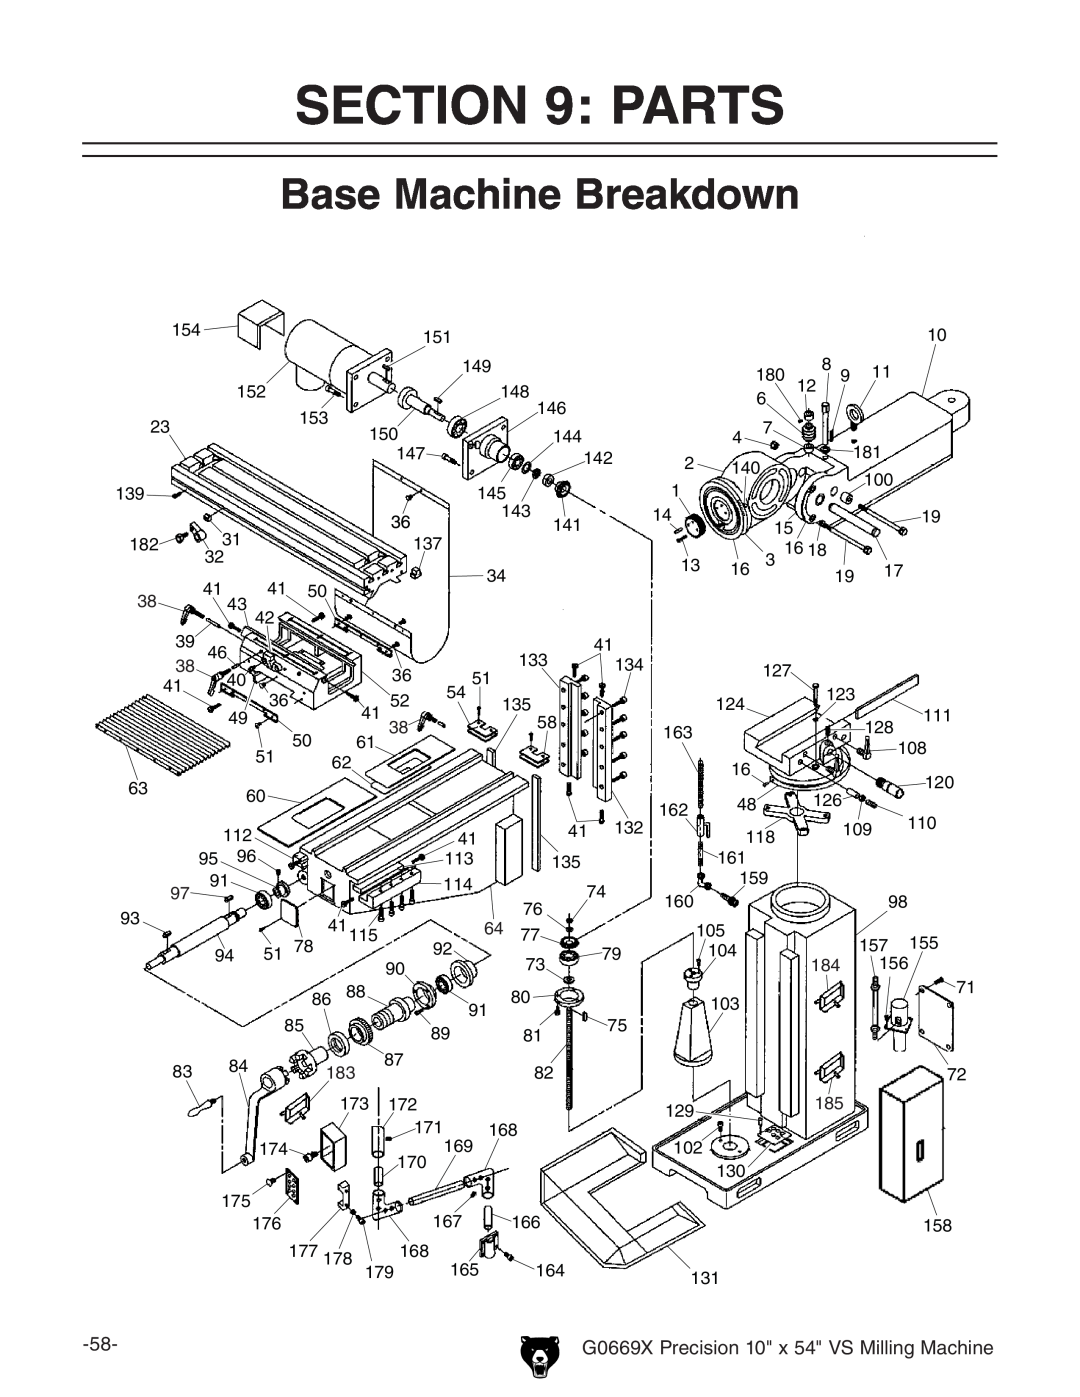 Grizzly g0669X owner manual Parts, Base Machine Breakdown 